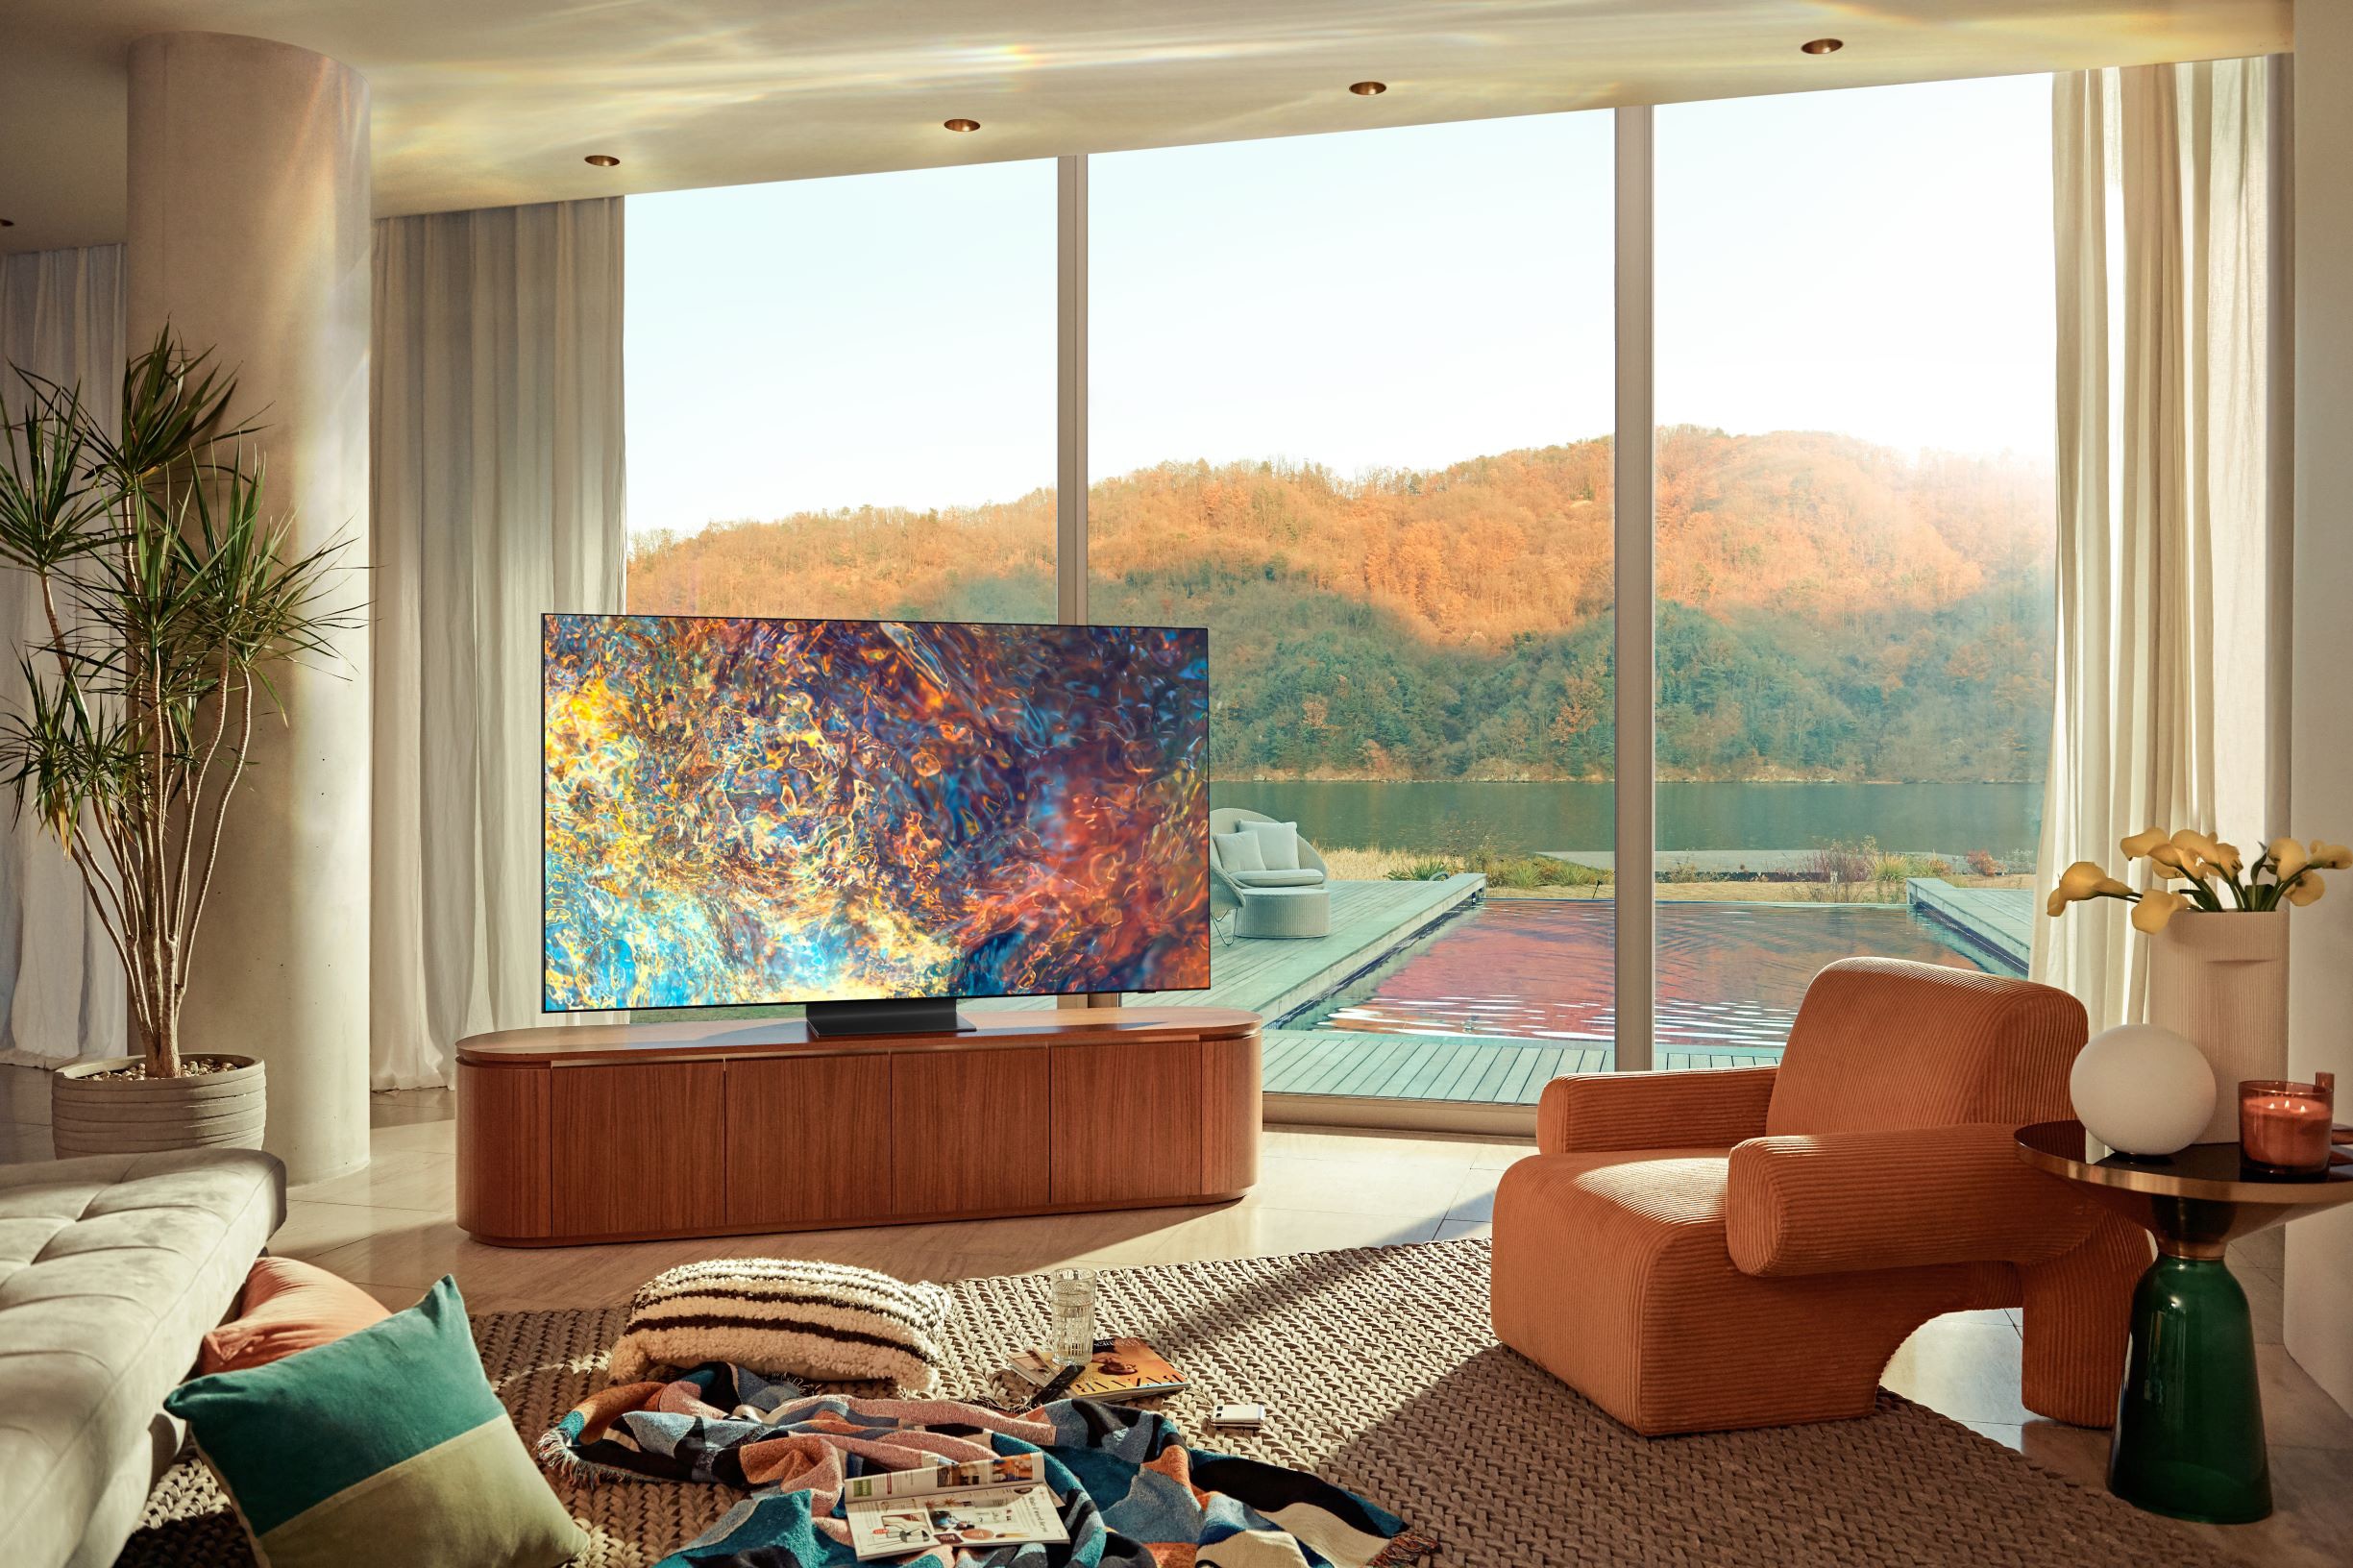 Samsung brings Neo QLED tech to 4K, 8K TVs, introduces new MicroLED